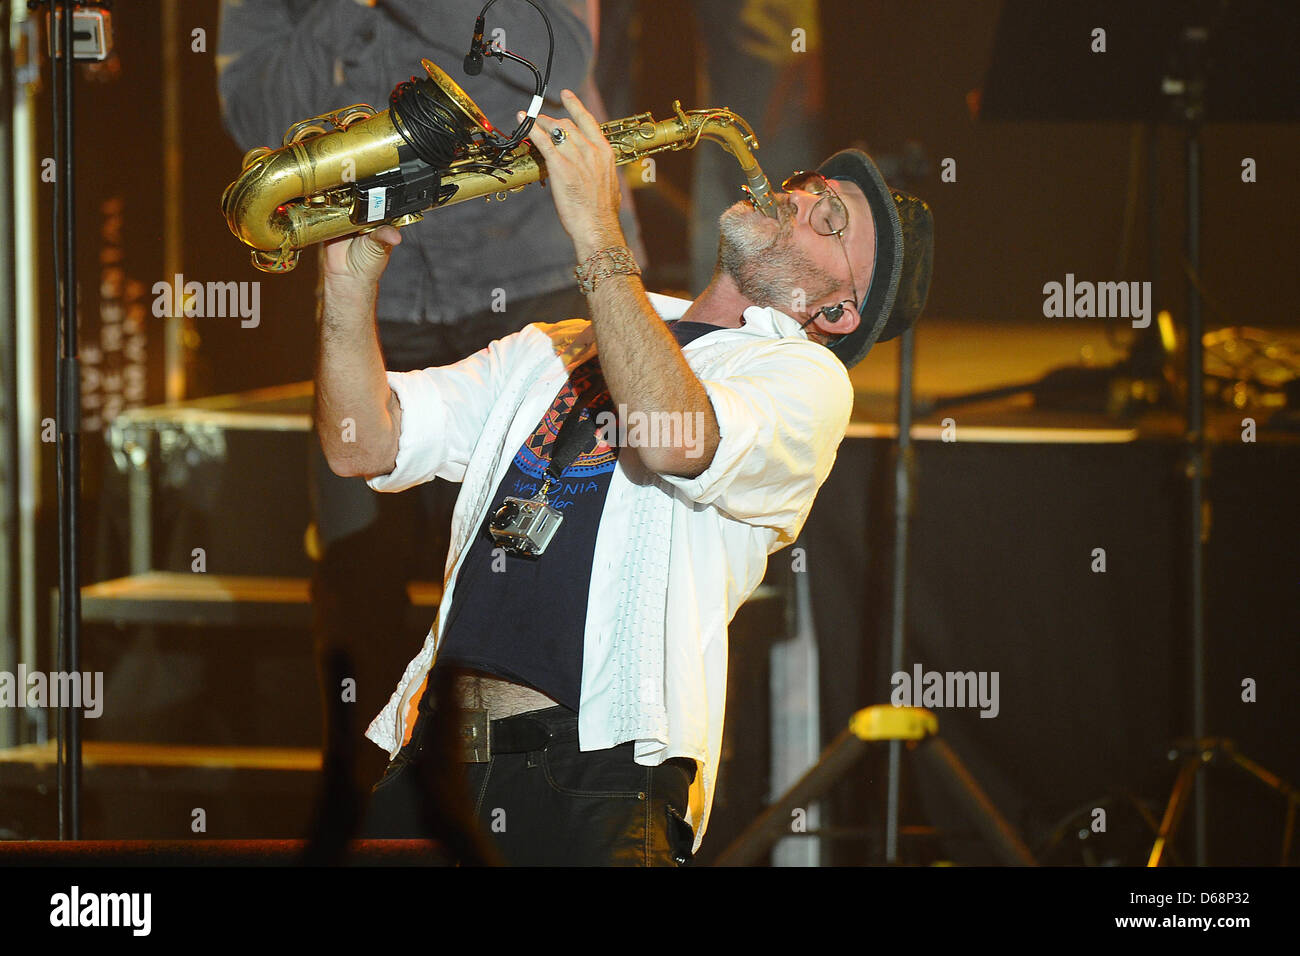 Saxophonist Todd Cooper performs on stage during The Alan Parsons Live Project tour 2012 at Circus Krone in Munich, Germany, 19 July 2012. Photo: Revierfoto Stock Photo